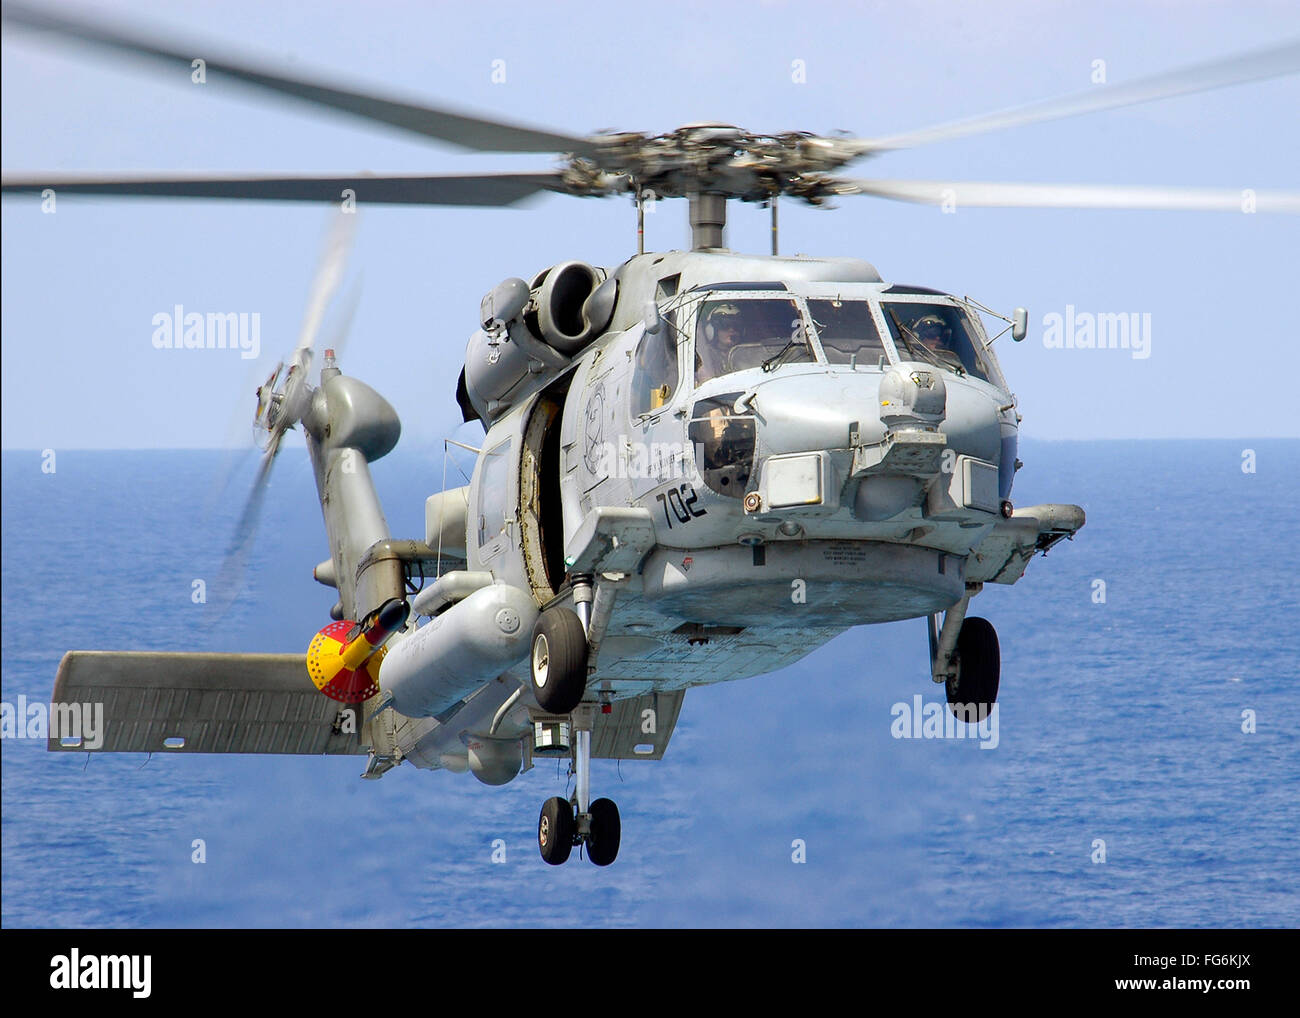 Seahawk helicopter, US Navy Seahawk helicopter in flight Stock Photo